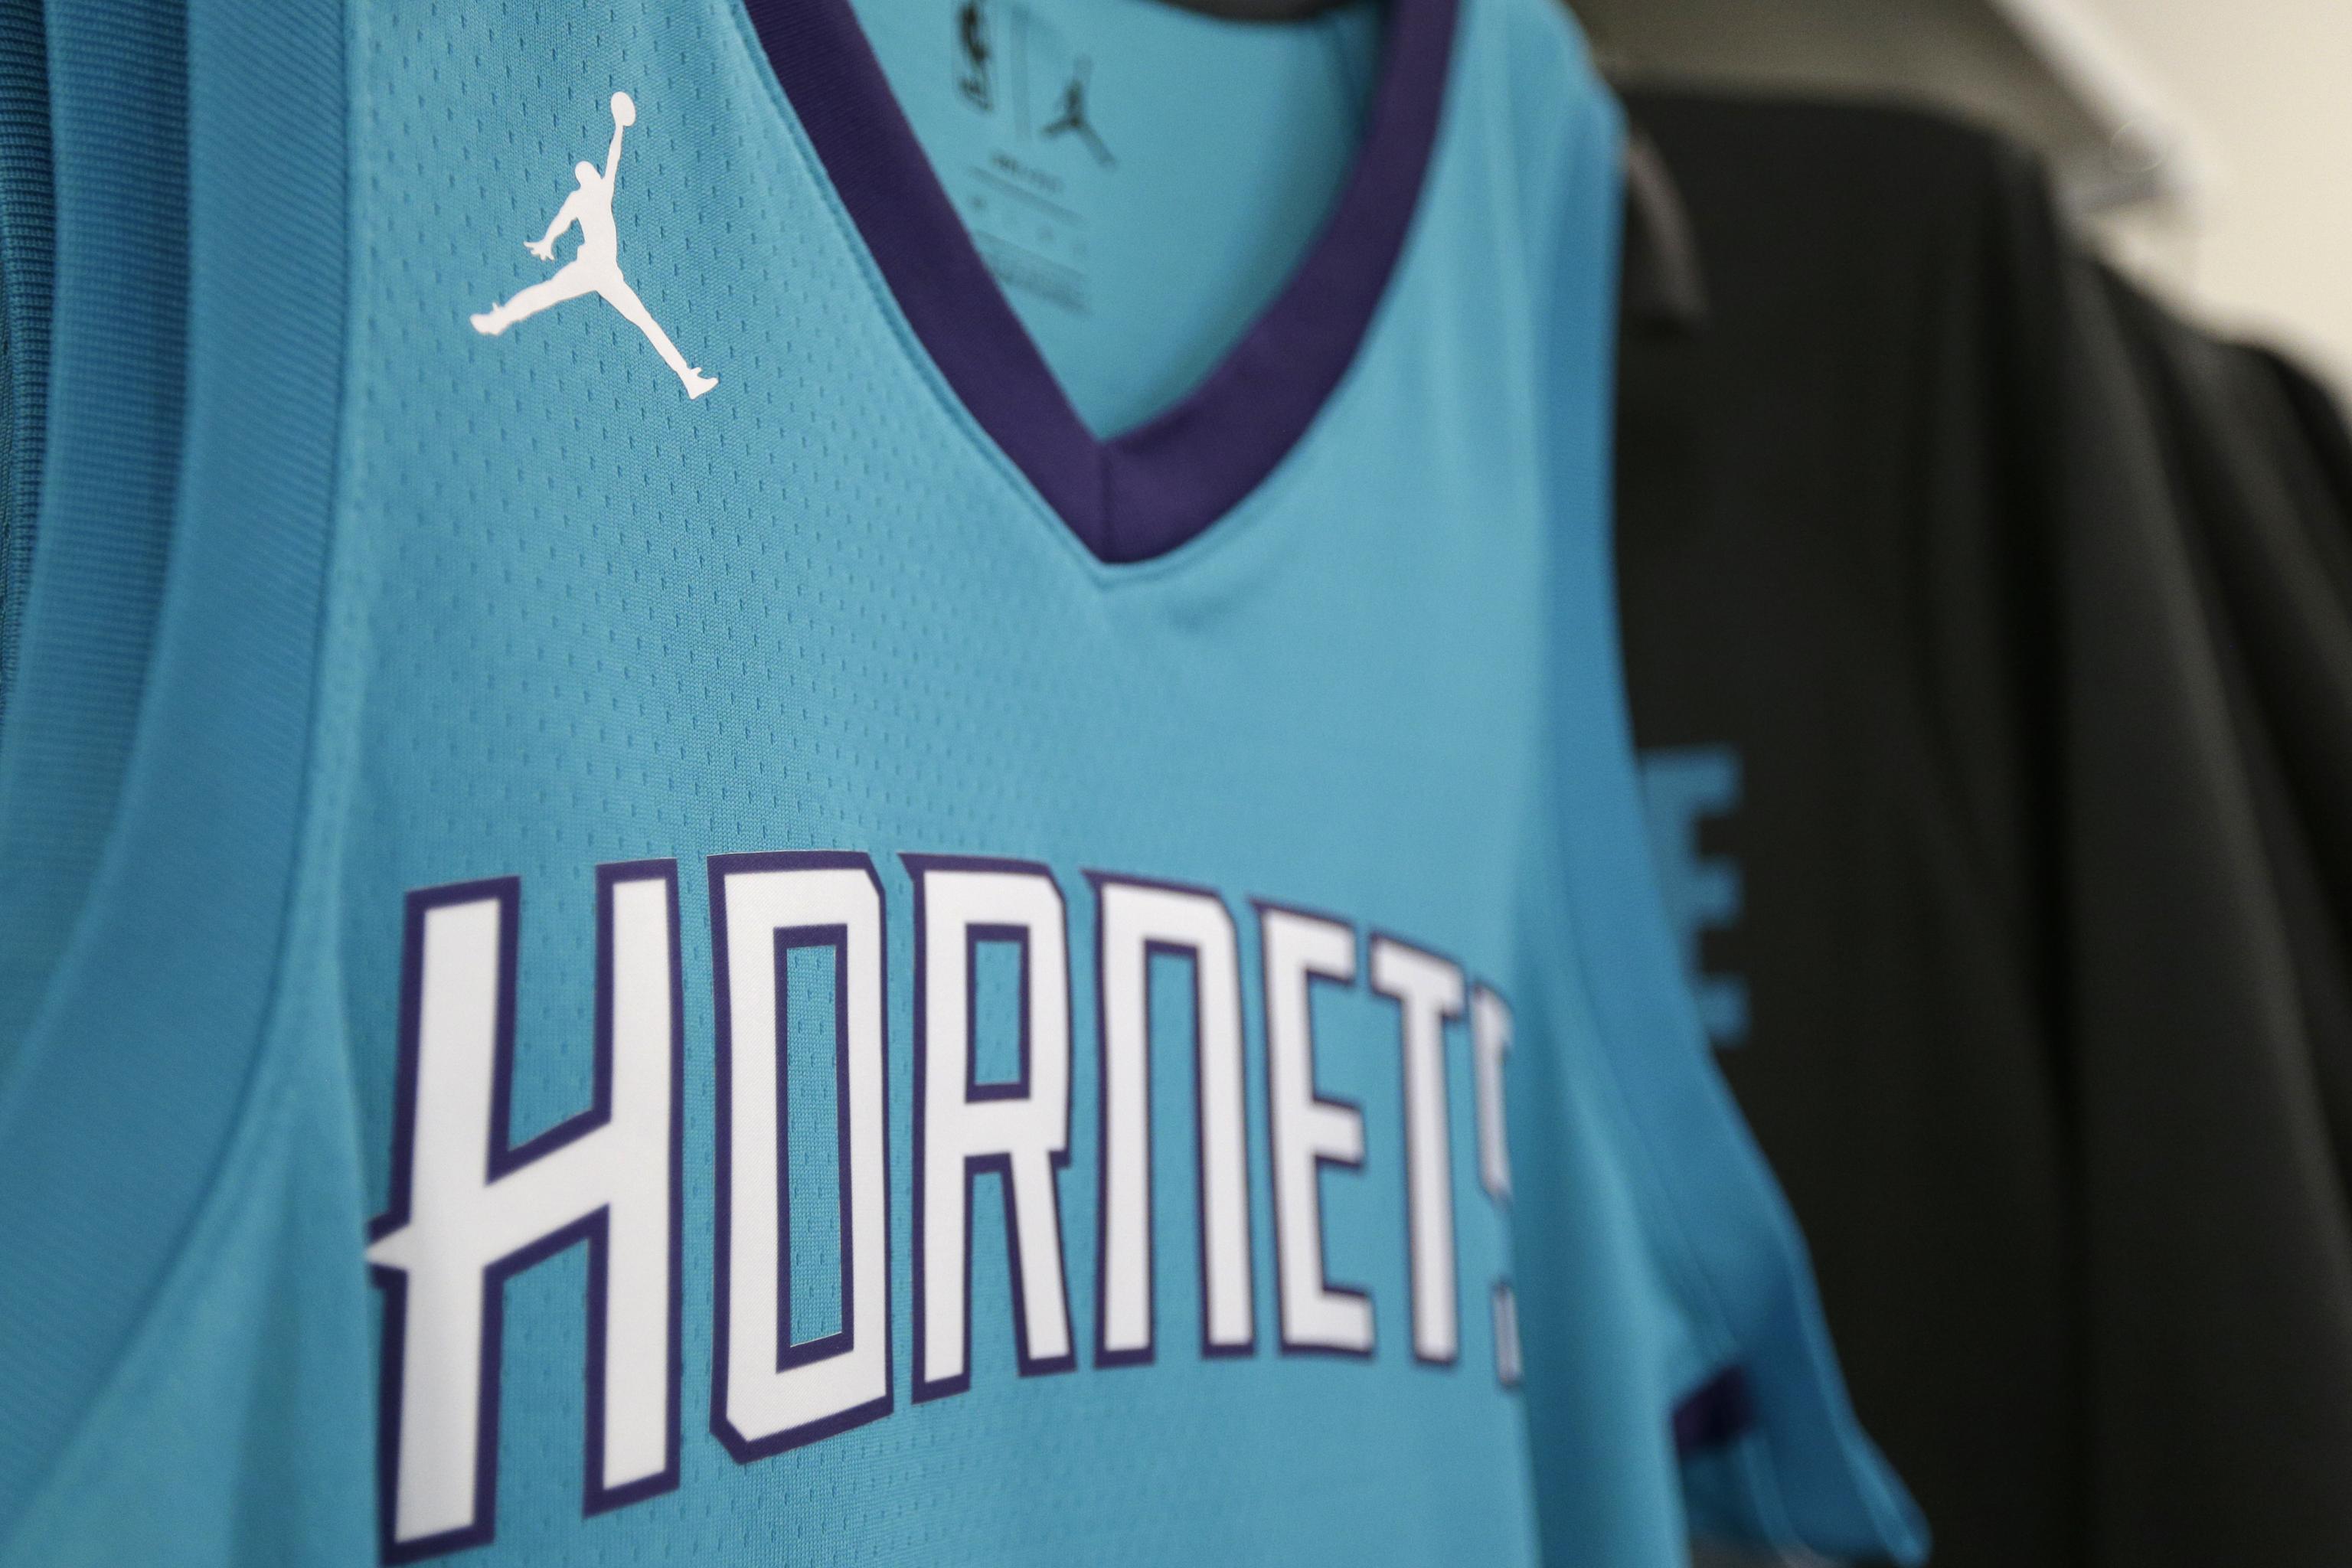 The NBA All-Star Jerseys Appear to Be an Ad for Nike's New Jordan Line